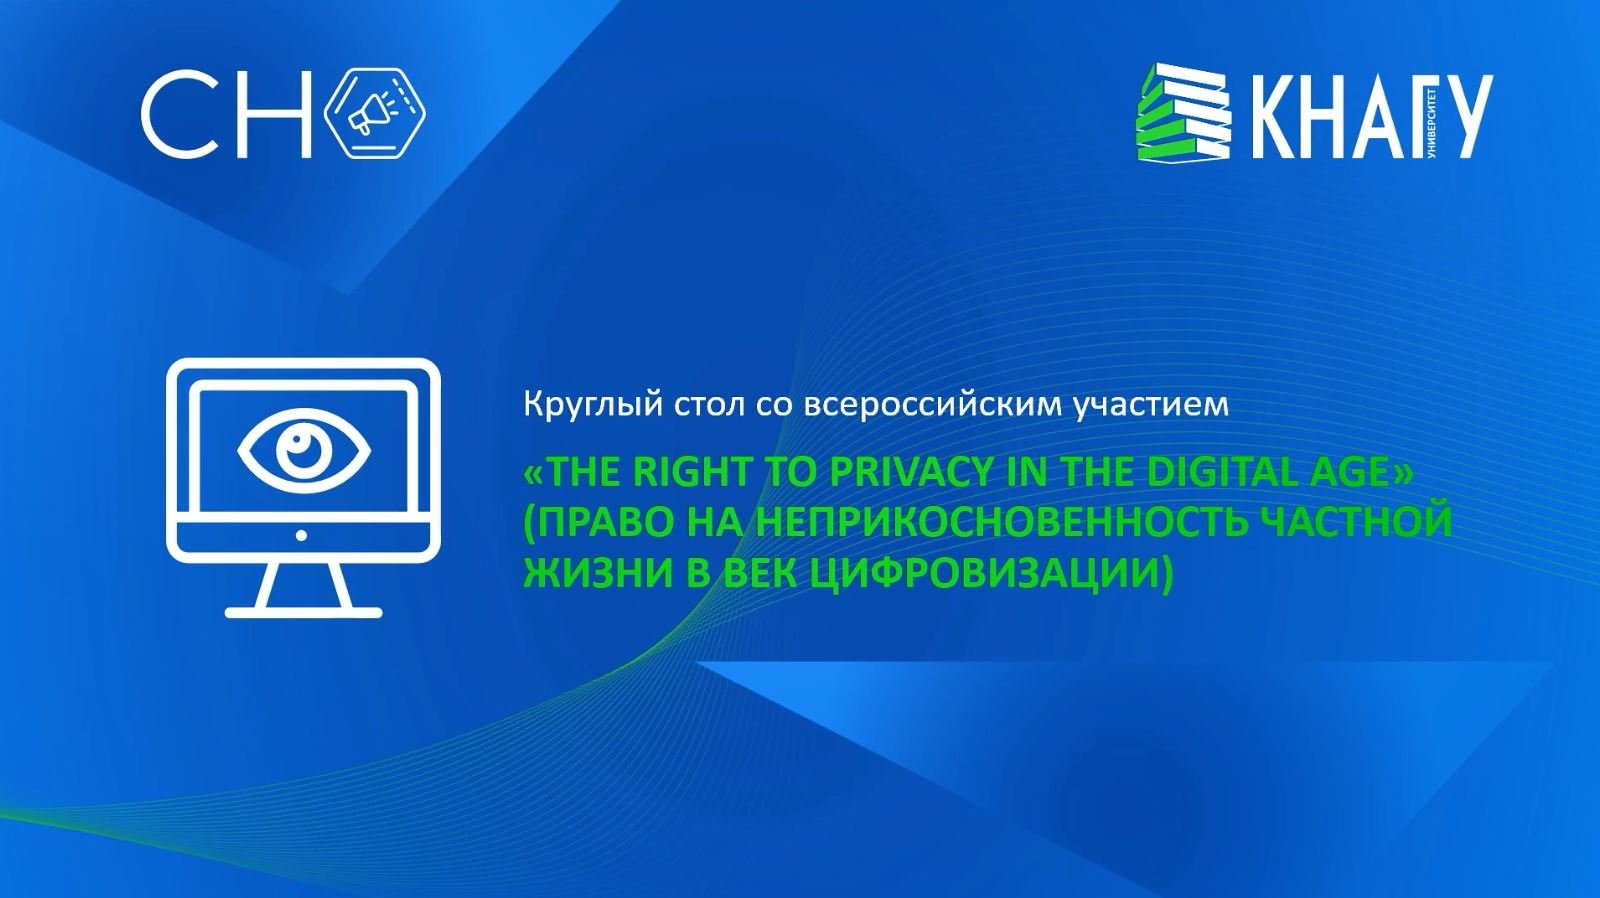 Круглый стол с всероссийским участием «The Right to Privacy in the Digital Age»